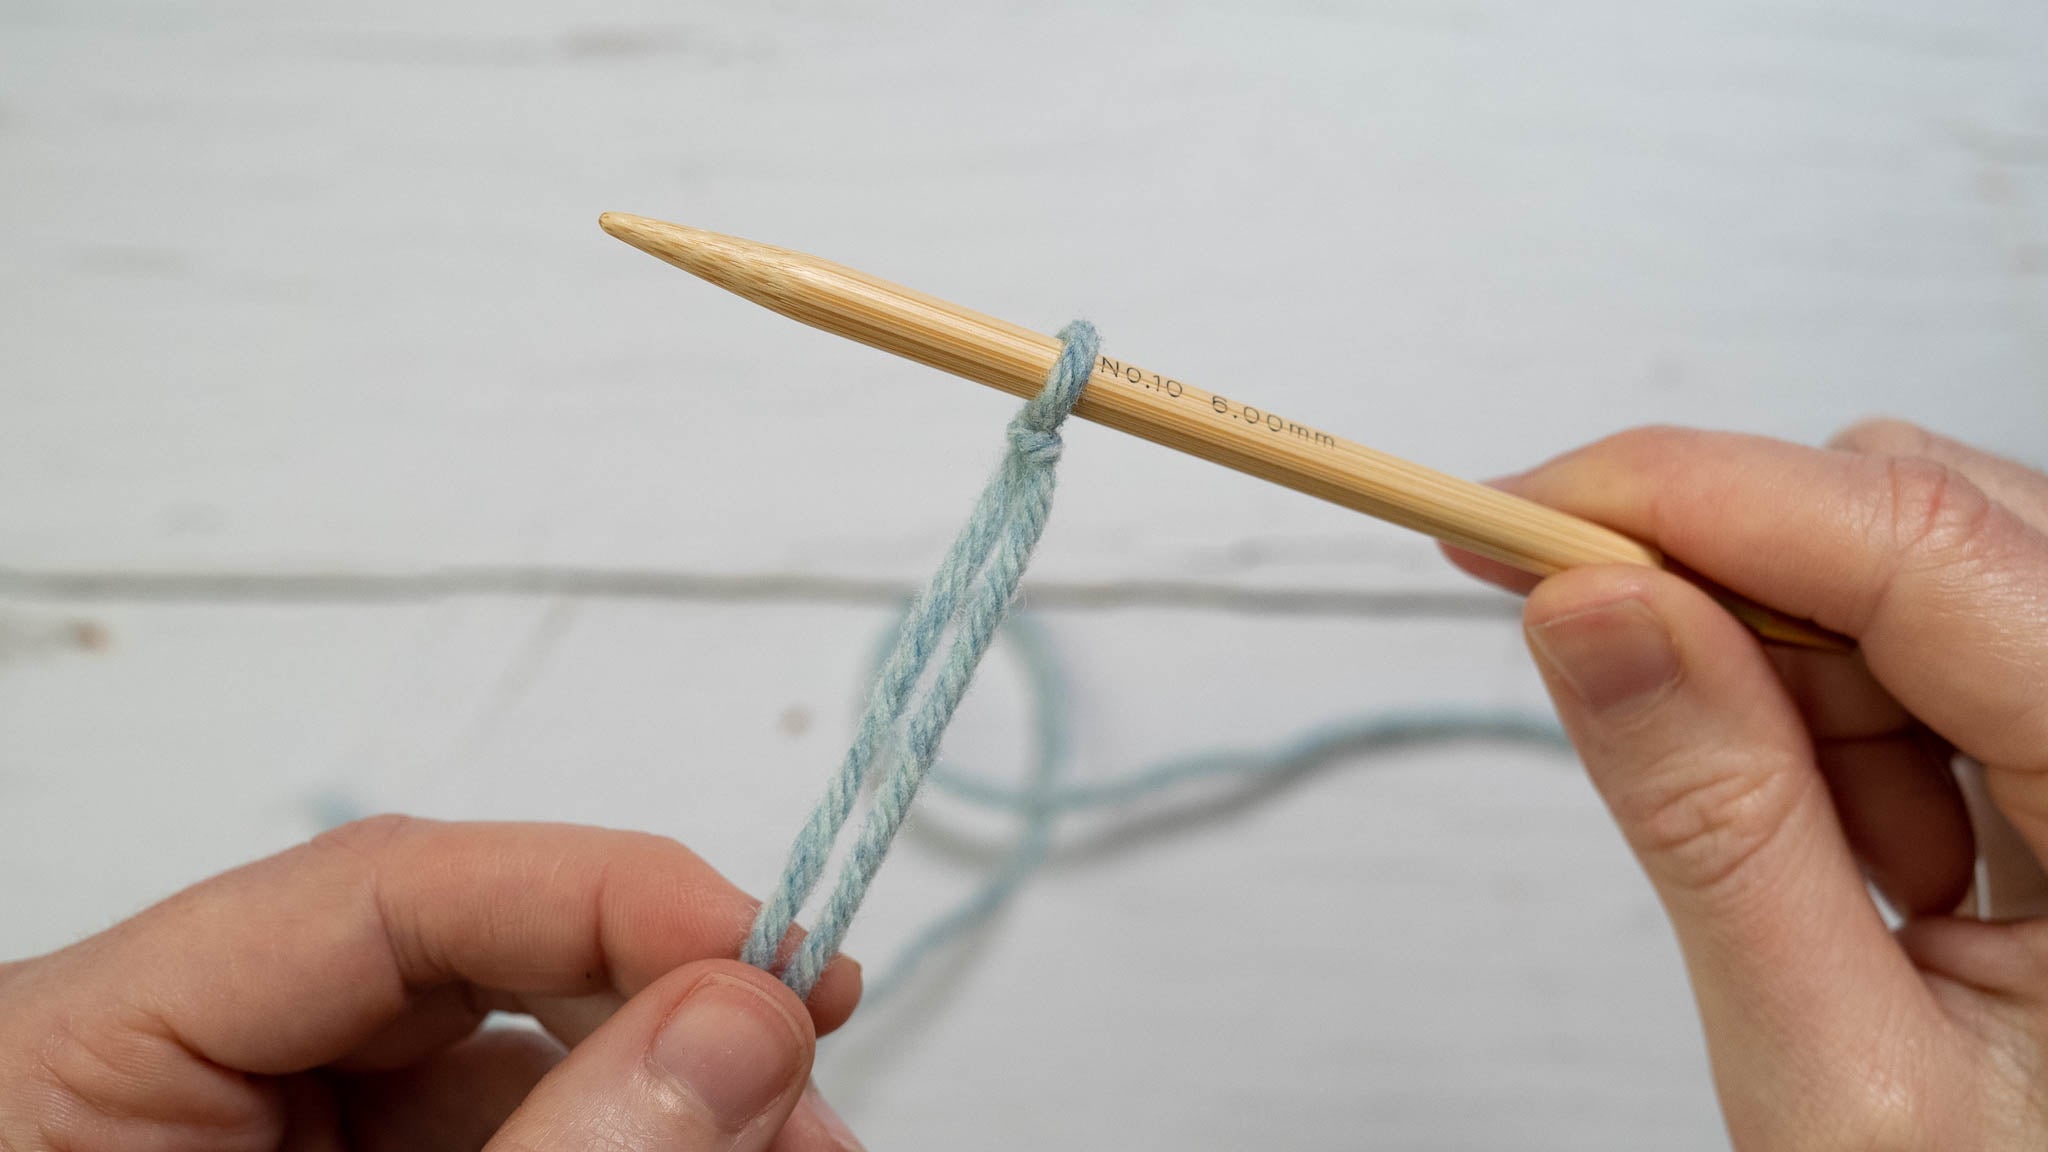 a slipknot on a knitting needle, which is held in the right hand